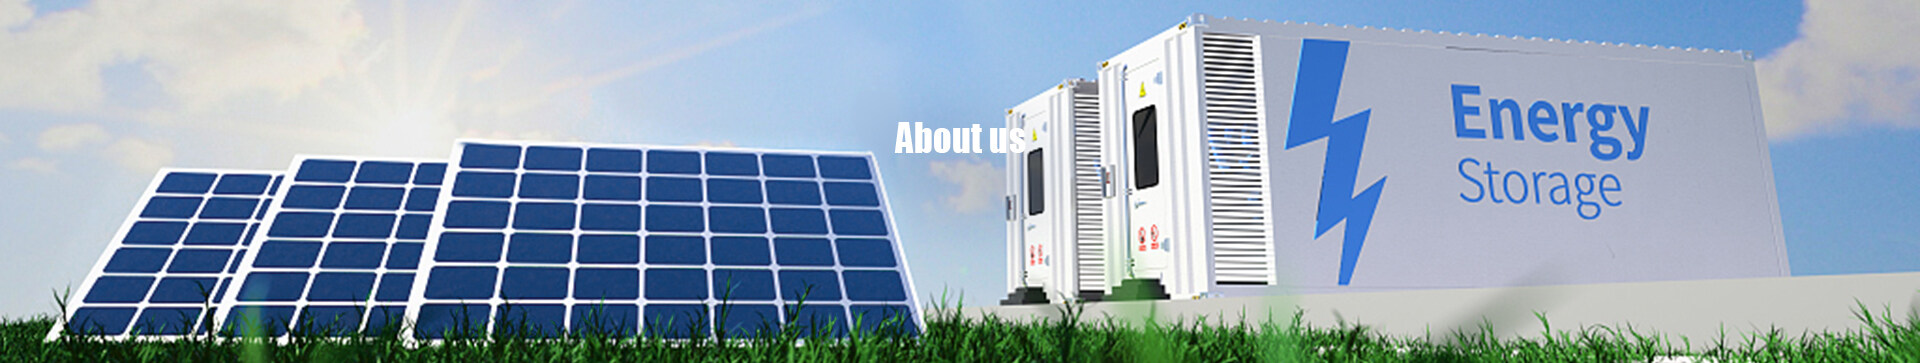 portable power station company, china portable power station, manufacturer of energy storage products such as LiFePO4 battery packs, commercial & industrial energy storage, residential energy storage, portable power station/solar generator, solar inverter, lift truck battery, RV/landscape bus/golf cart battery and other OEM/ODM battery in China.